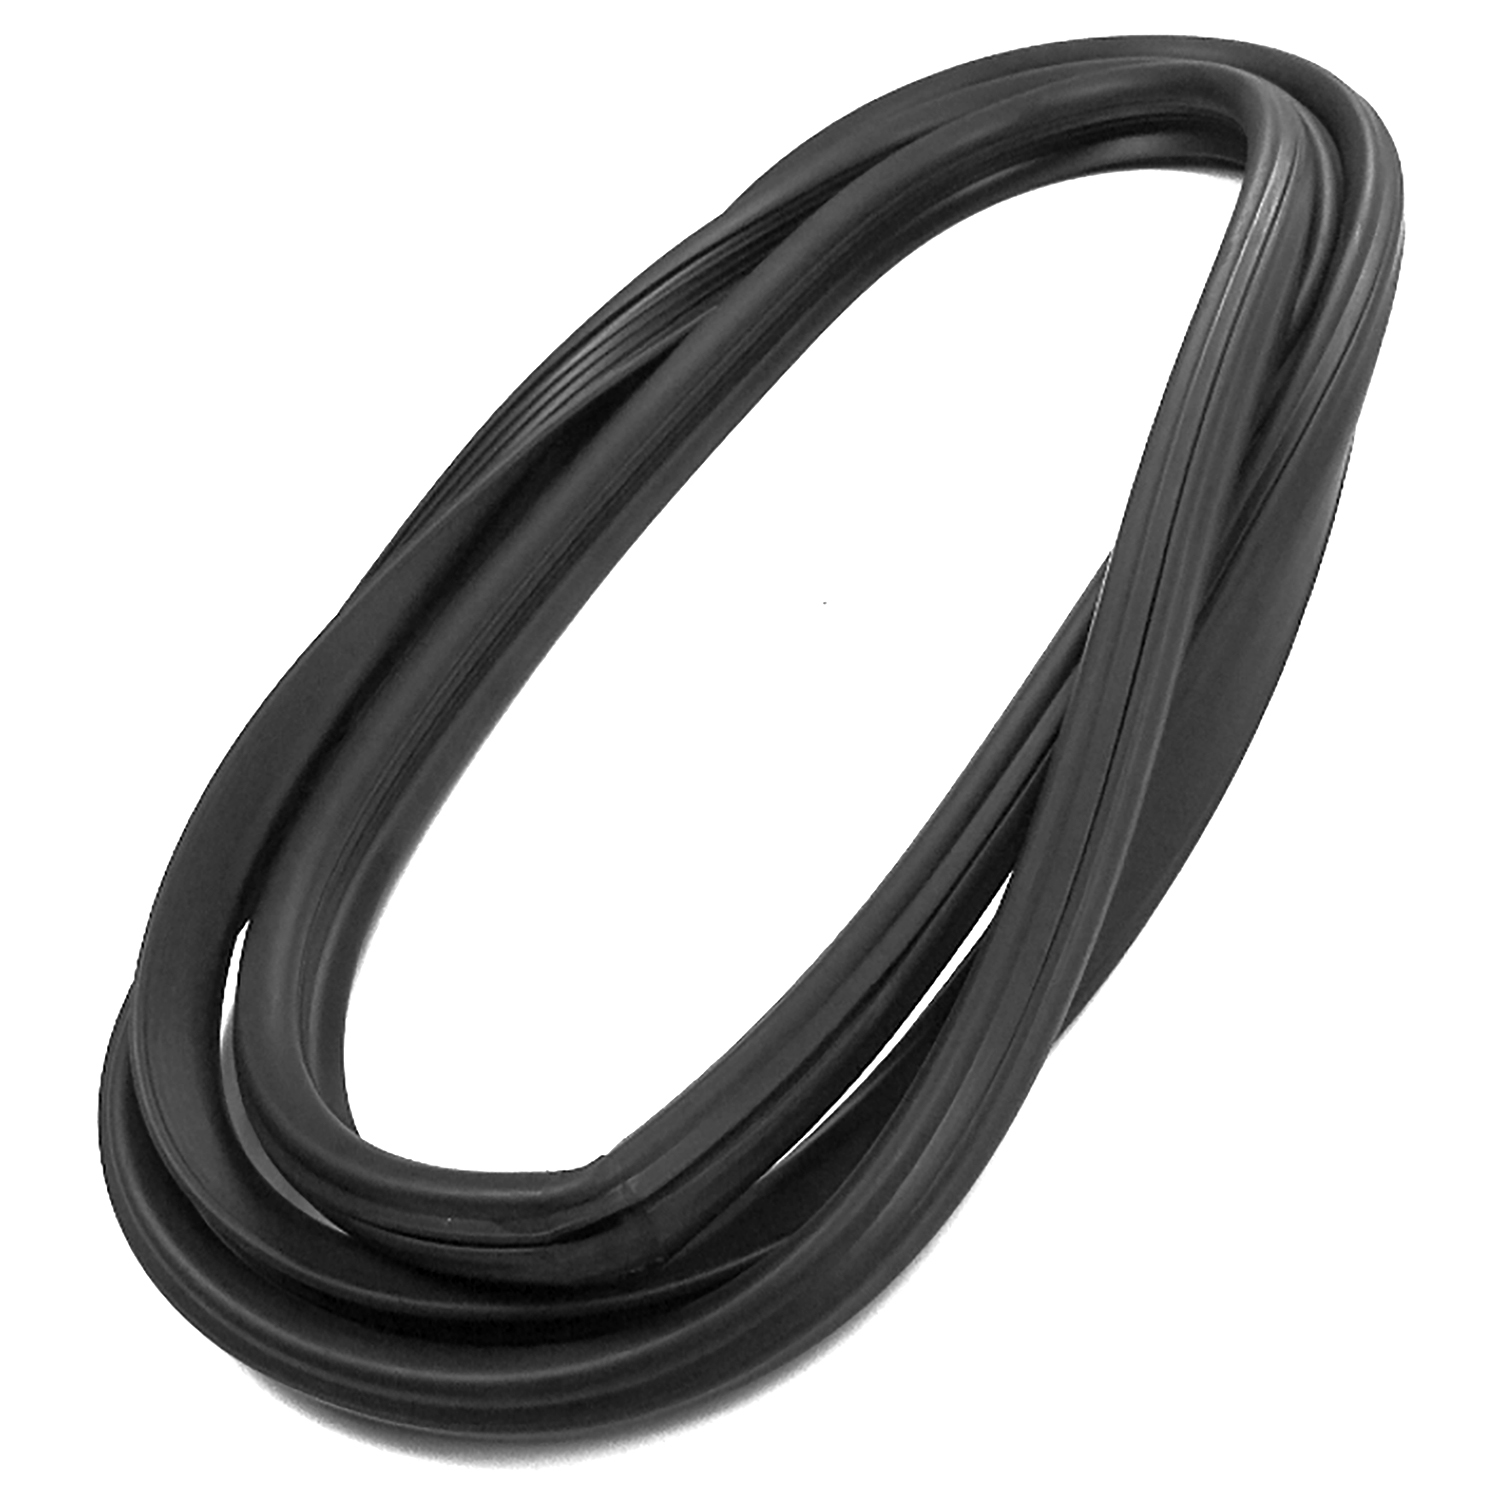 1962 Ford F-250 Windshield Seal, 61-66 Ford Full Size Pickup, Without Trim Groove, Each-VWS 3304-B